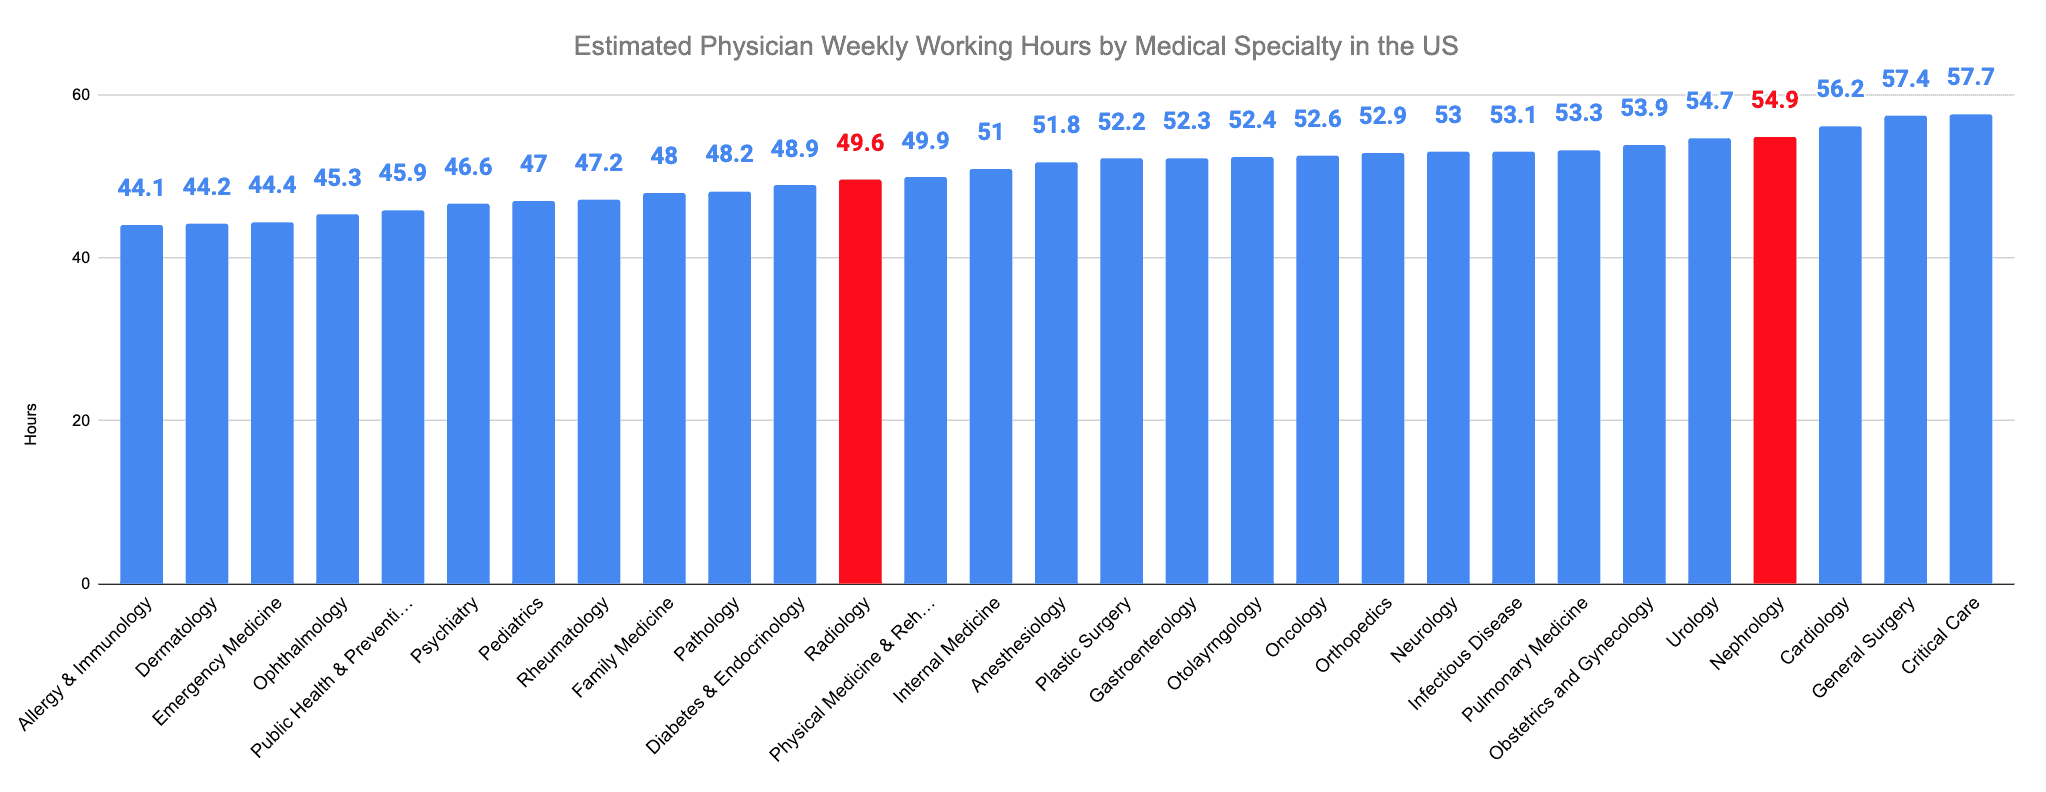 Radiology vs. Nephrology Estimated Physician Weekly Working Hours by Medical Specialty in the US